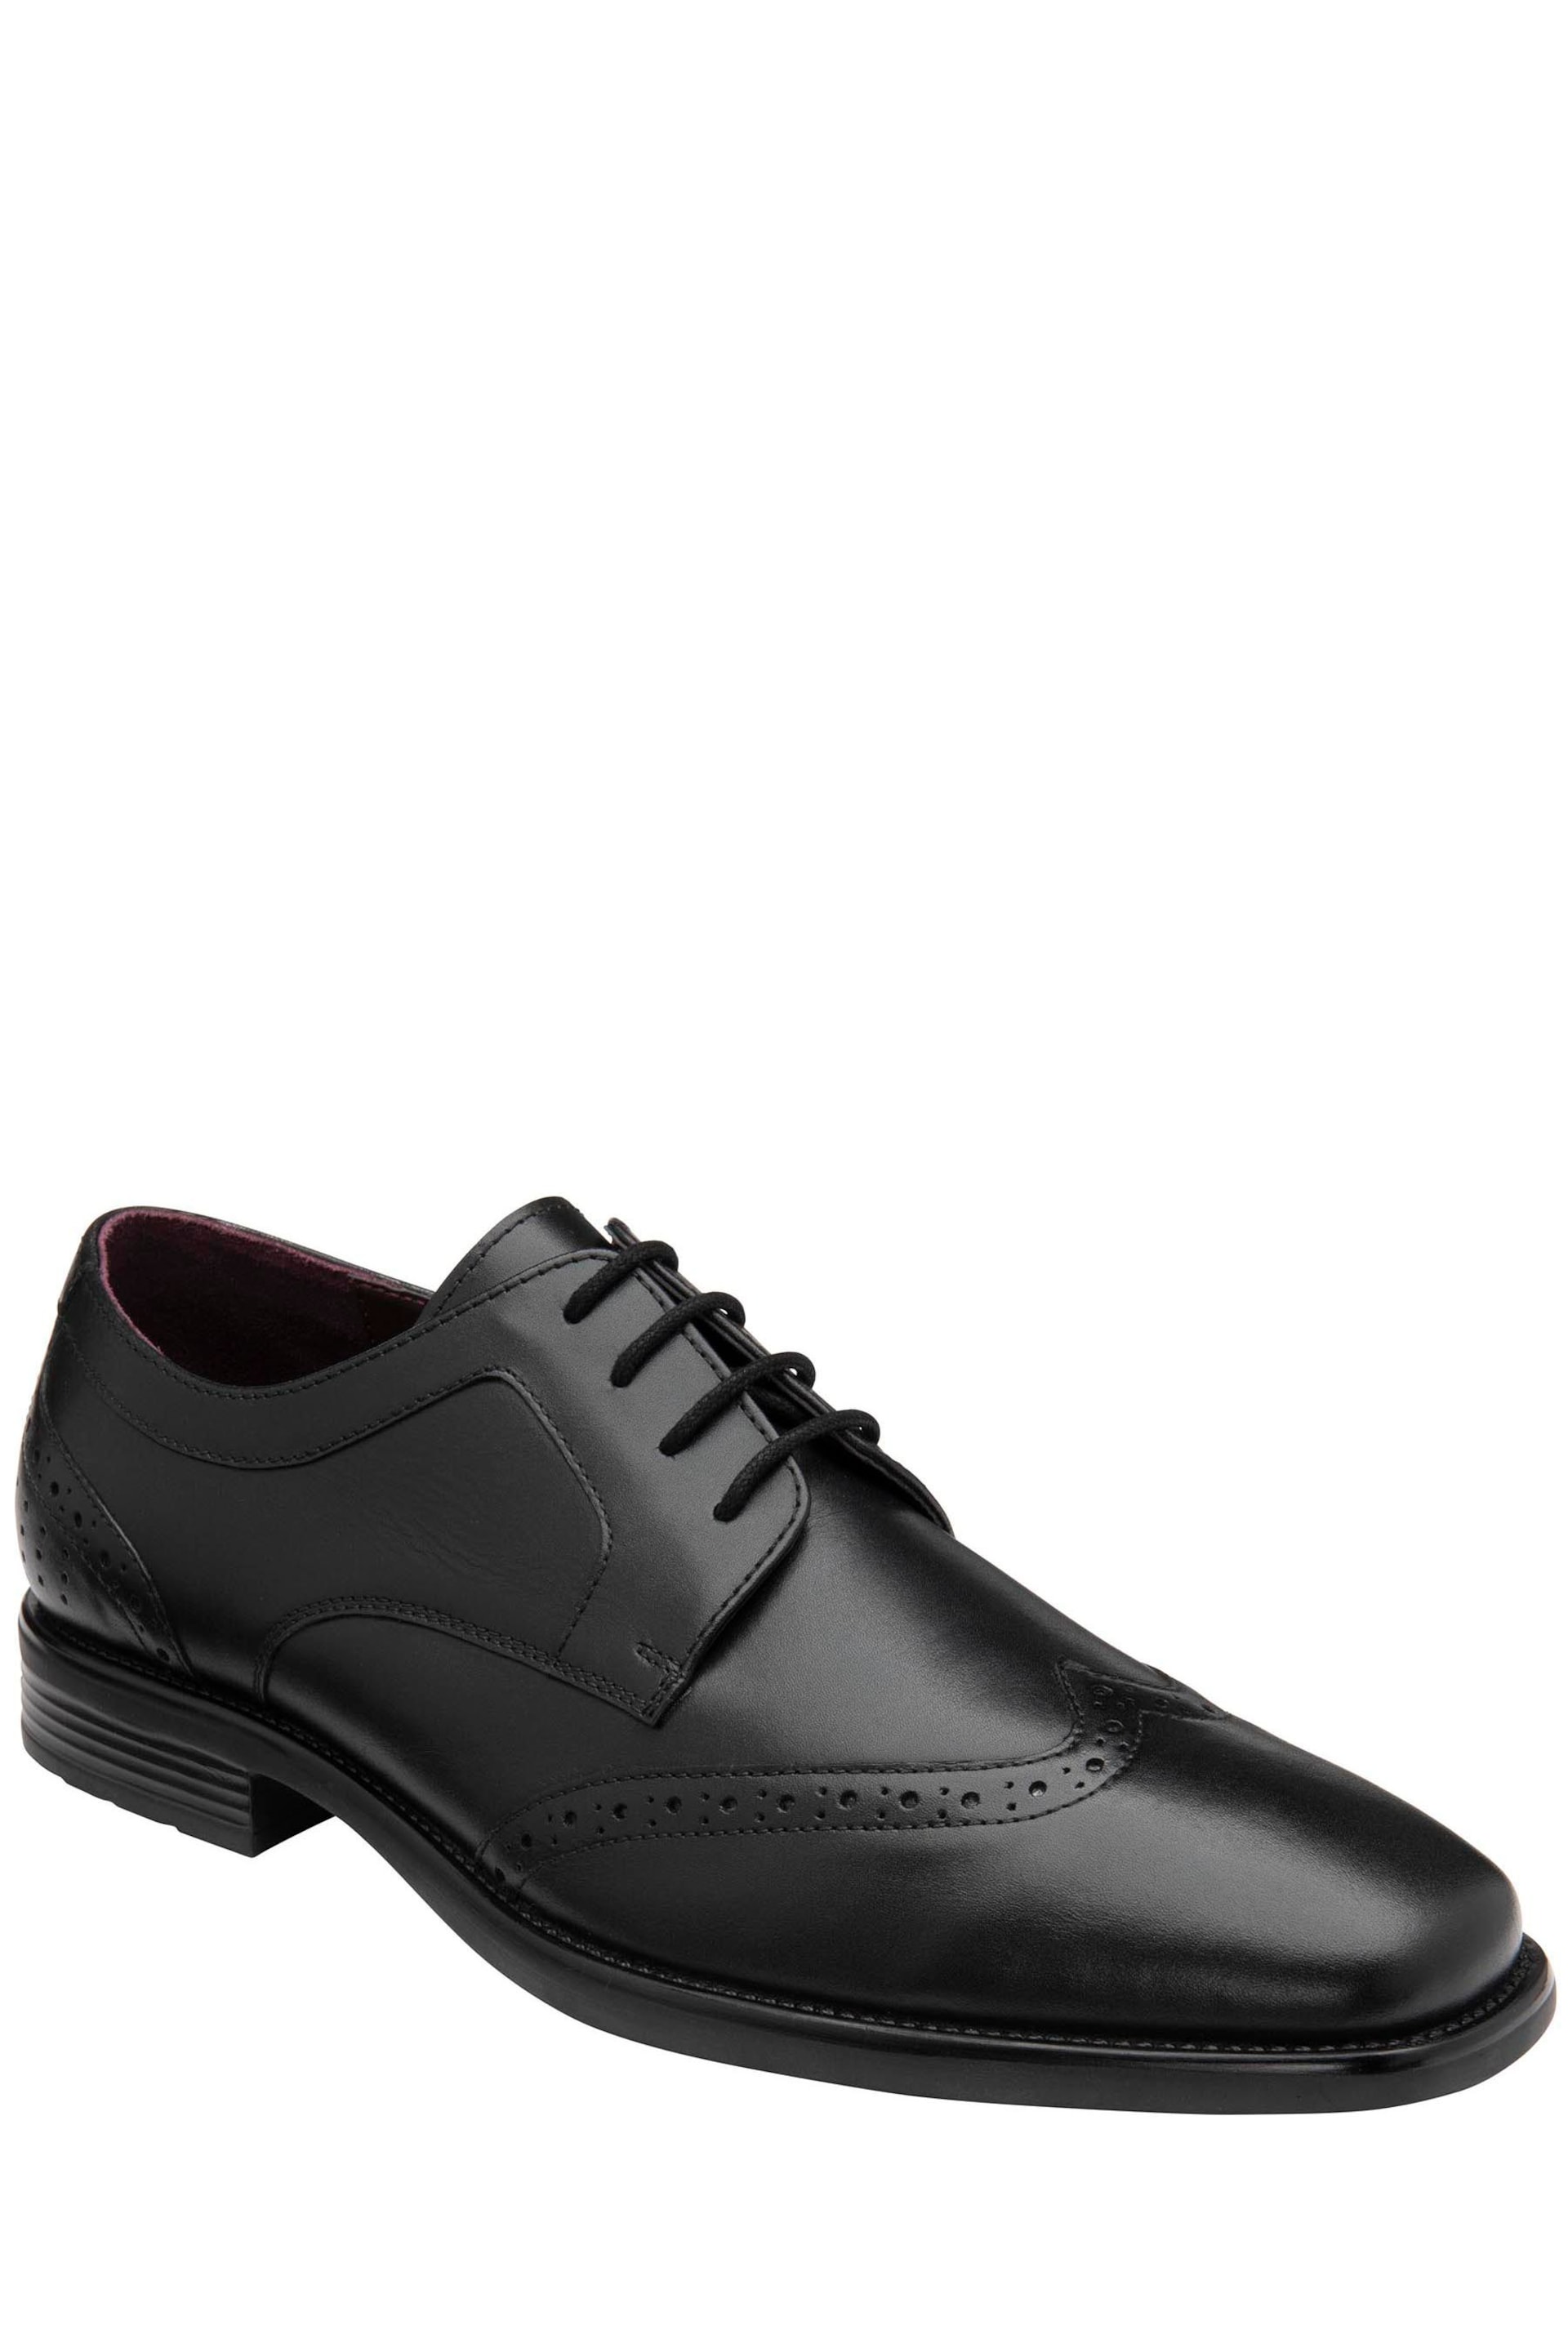 Lotus Black Leather Lace-Up Brogues - Image 1 of 4